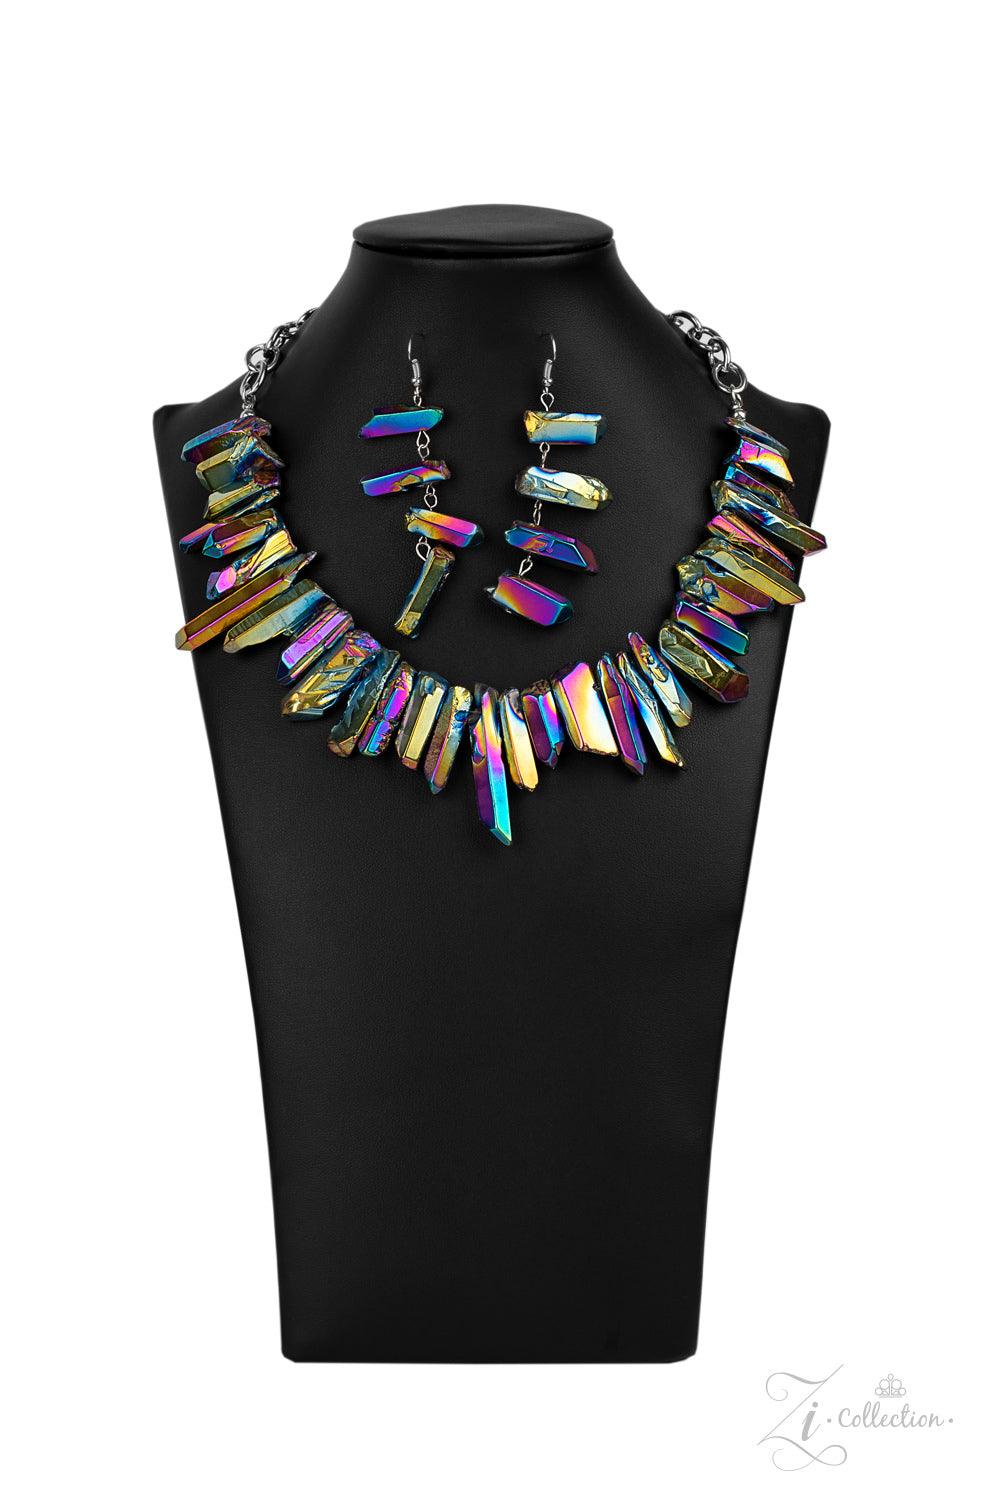 Paparazzi Accessories Charismatic Featuring an oil spill iridescence, raw cut pieces of hematite are threaded along an invisible wire below the collar for a colorfully courageous look. Features an adjustable clasp closure. Sold as one individual necklace.